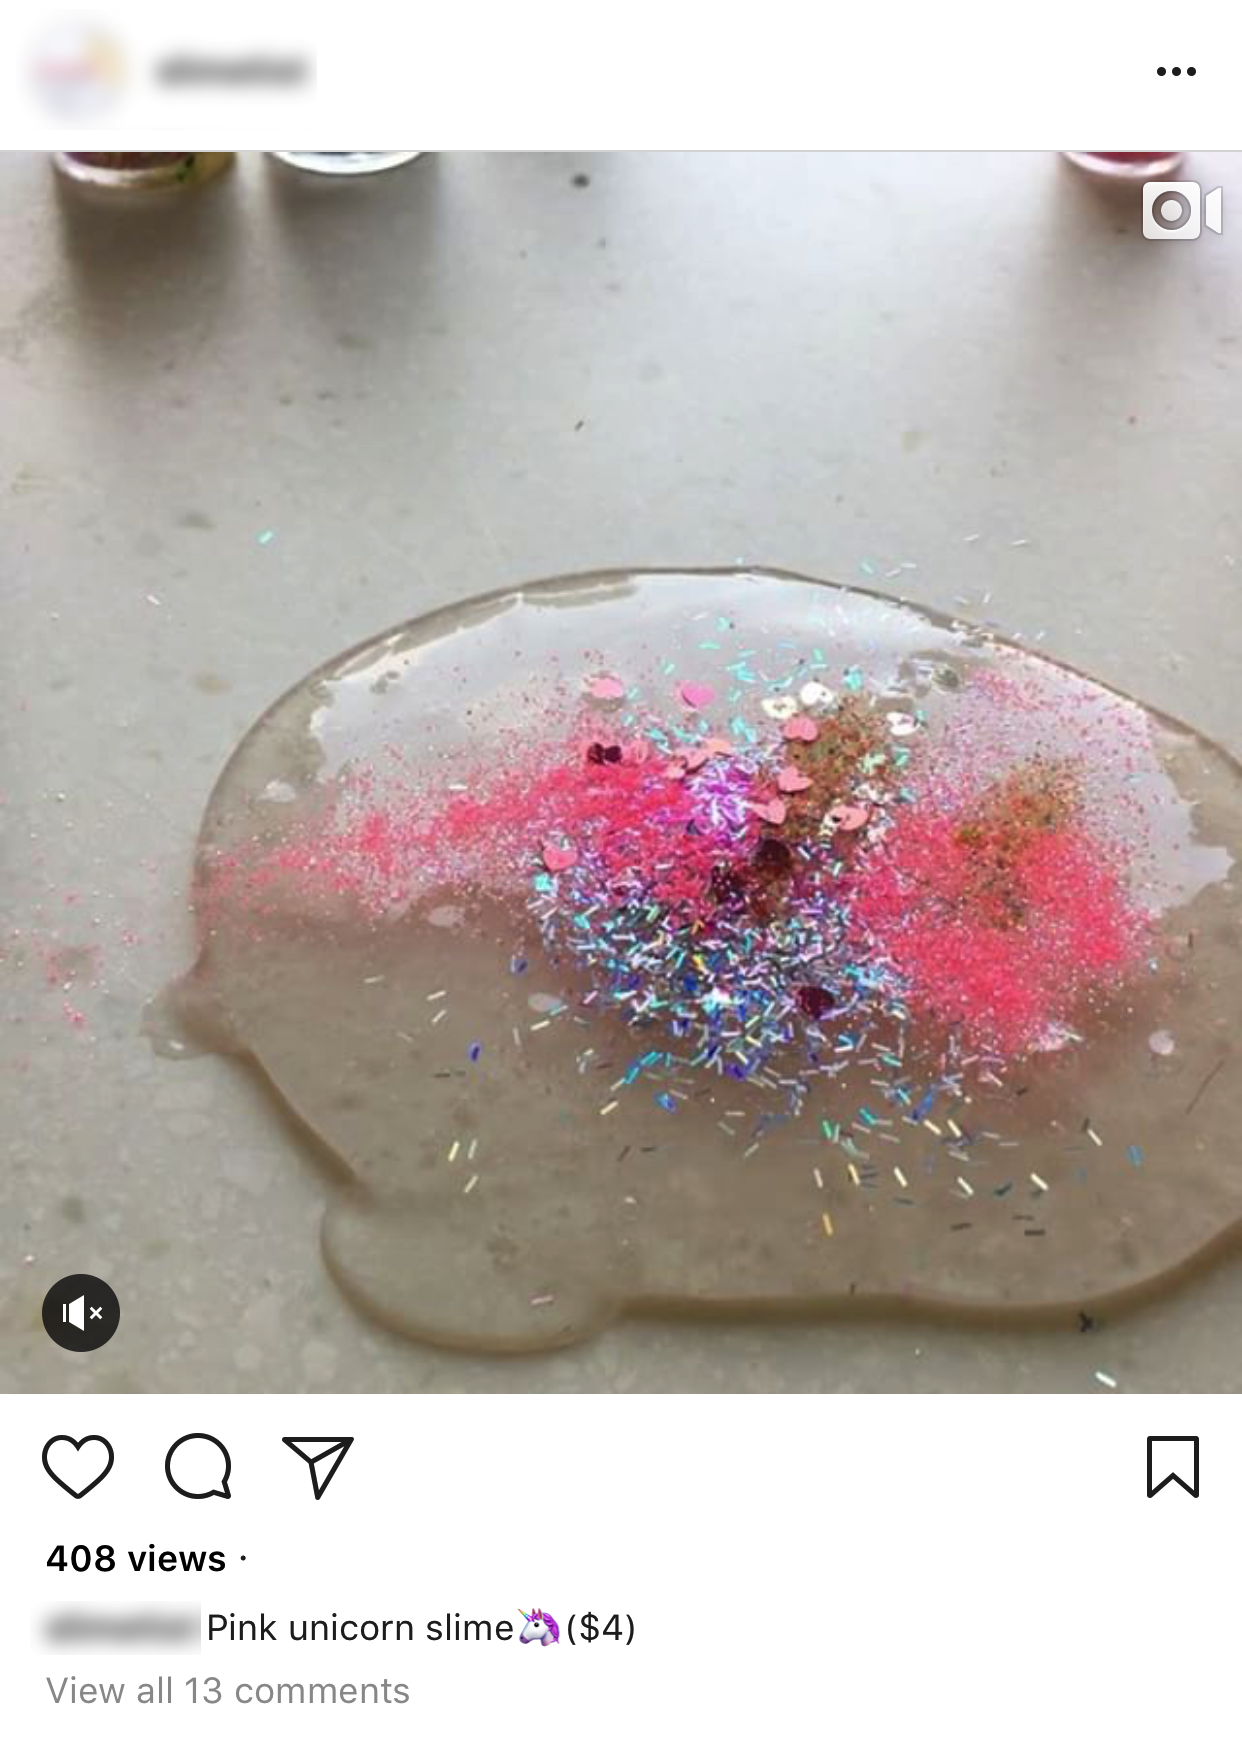 Slime sold by a budding 14-year-old HOGC entrepreneur.